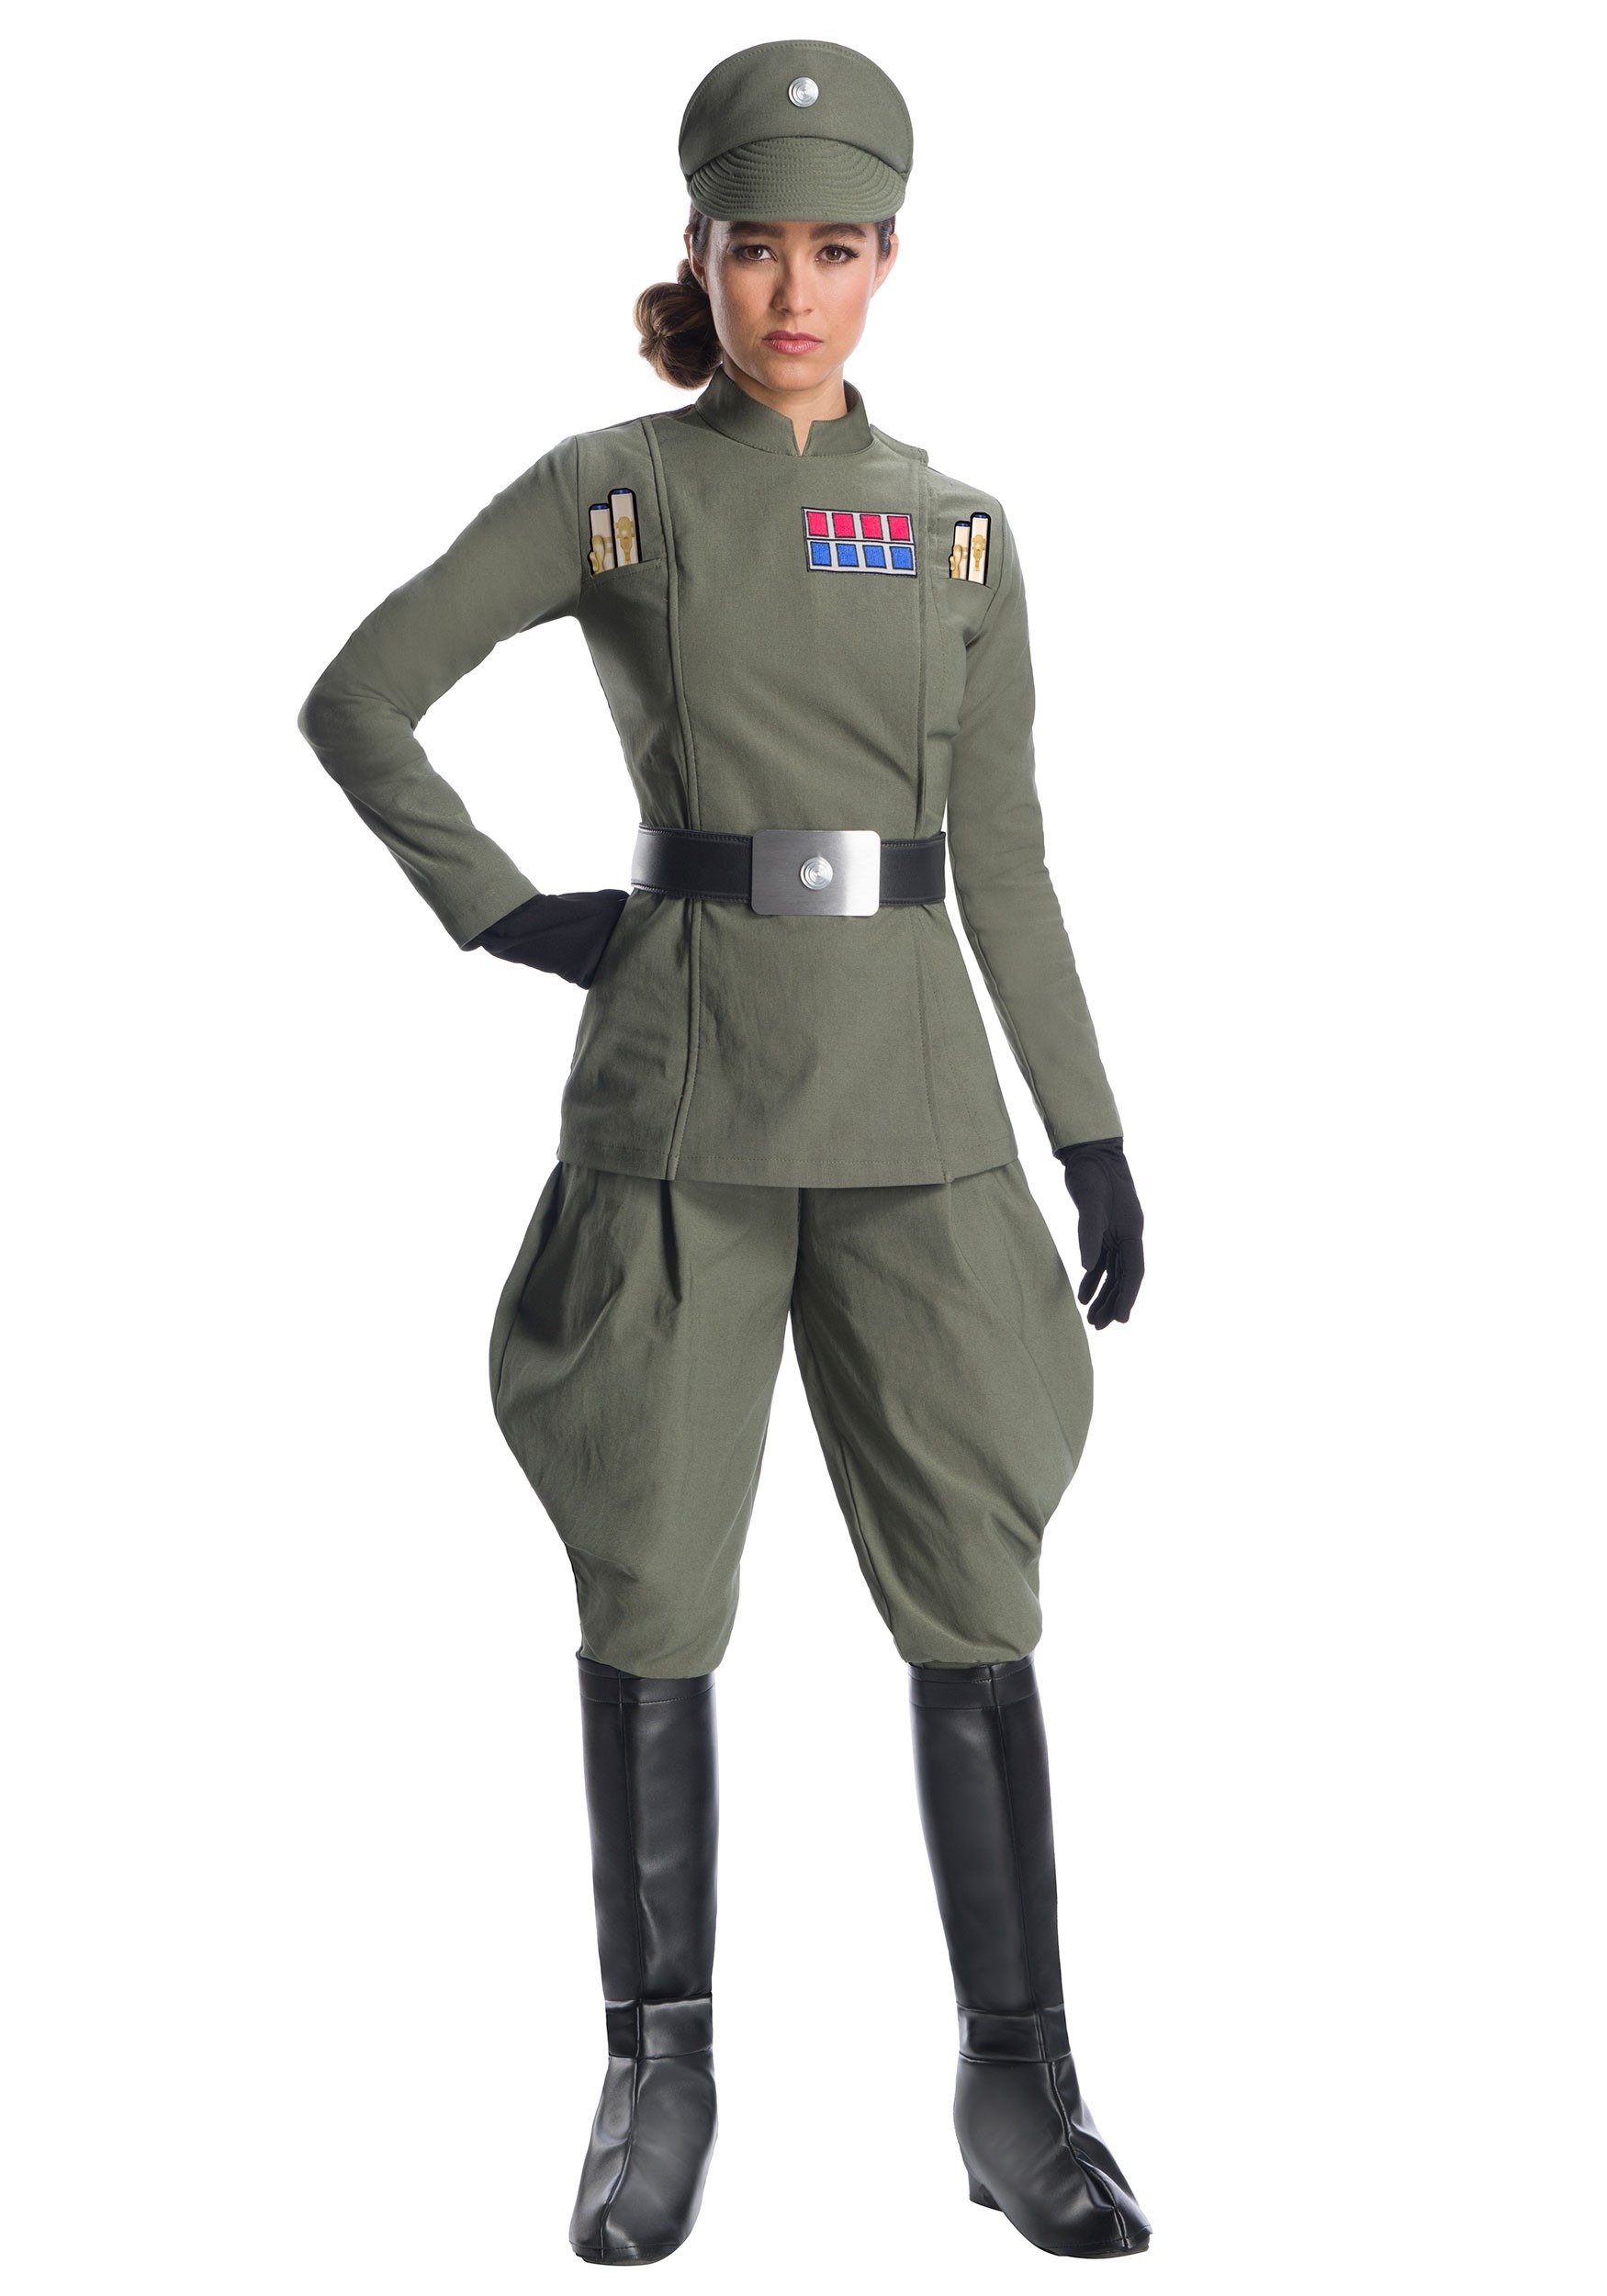 Star Wars Cosplay IMPERIAL OFFICIER Blanc Grand Amiral Uniforme Cosplay Costume 